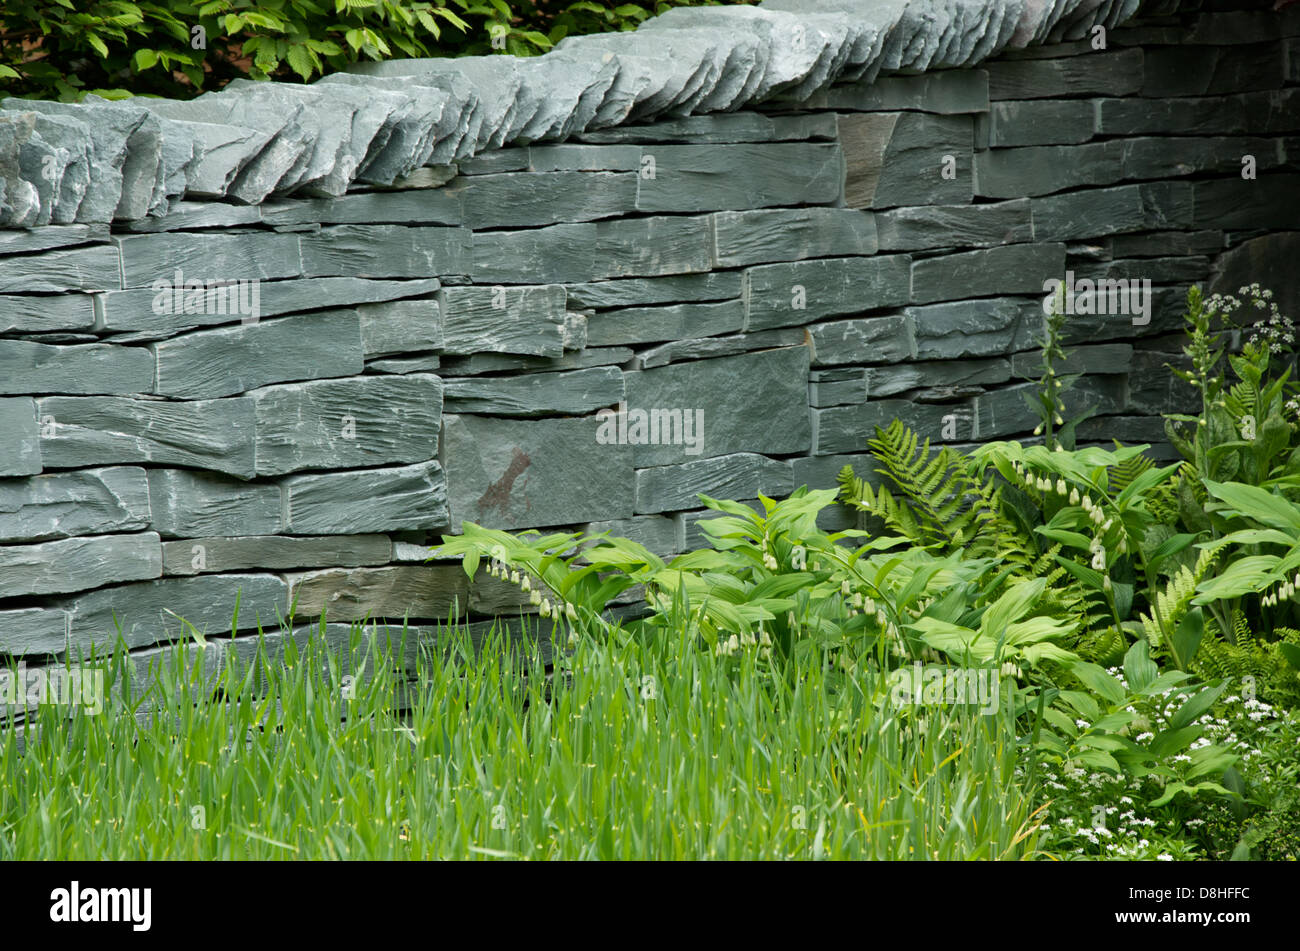 Dry Stone Wall in Stockton Drilling's 'As Nature Intended' Garden at RHS Chelsea Flower Show 2013, Stock Photo -